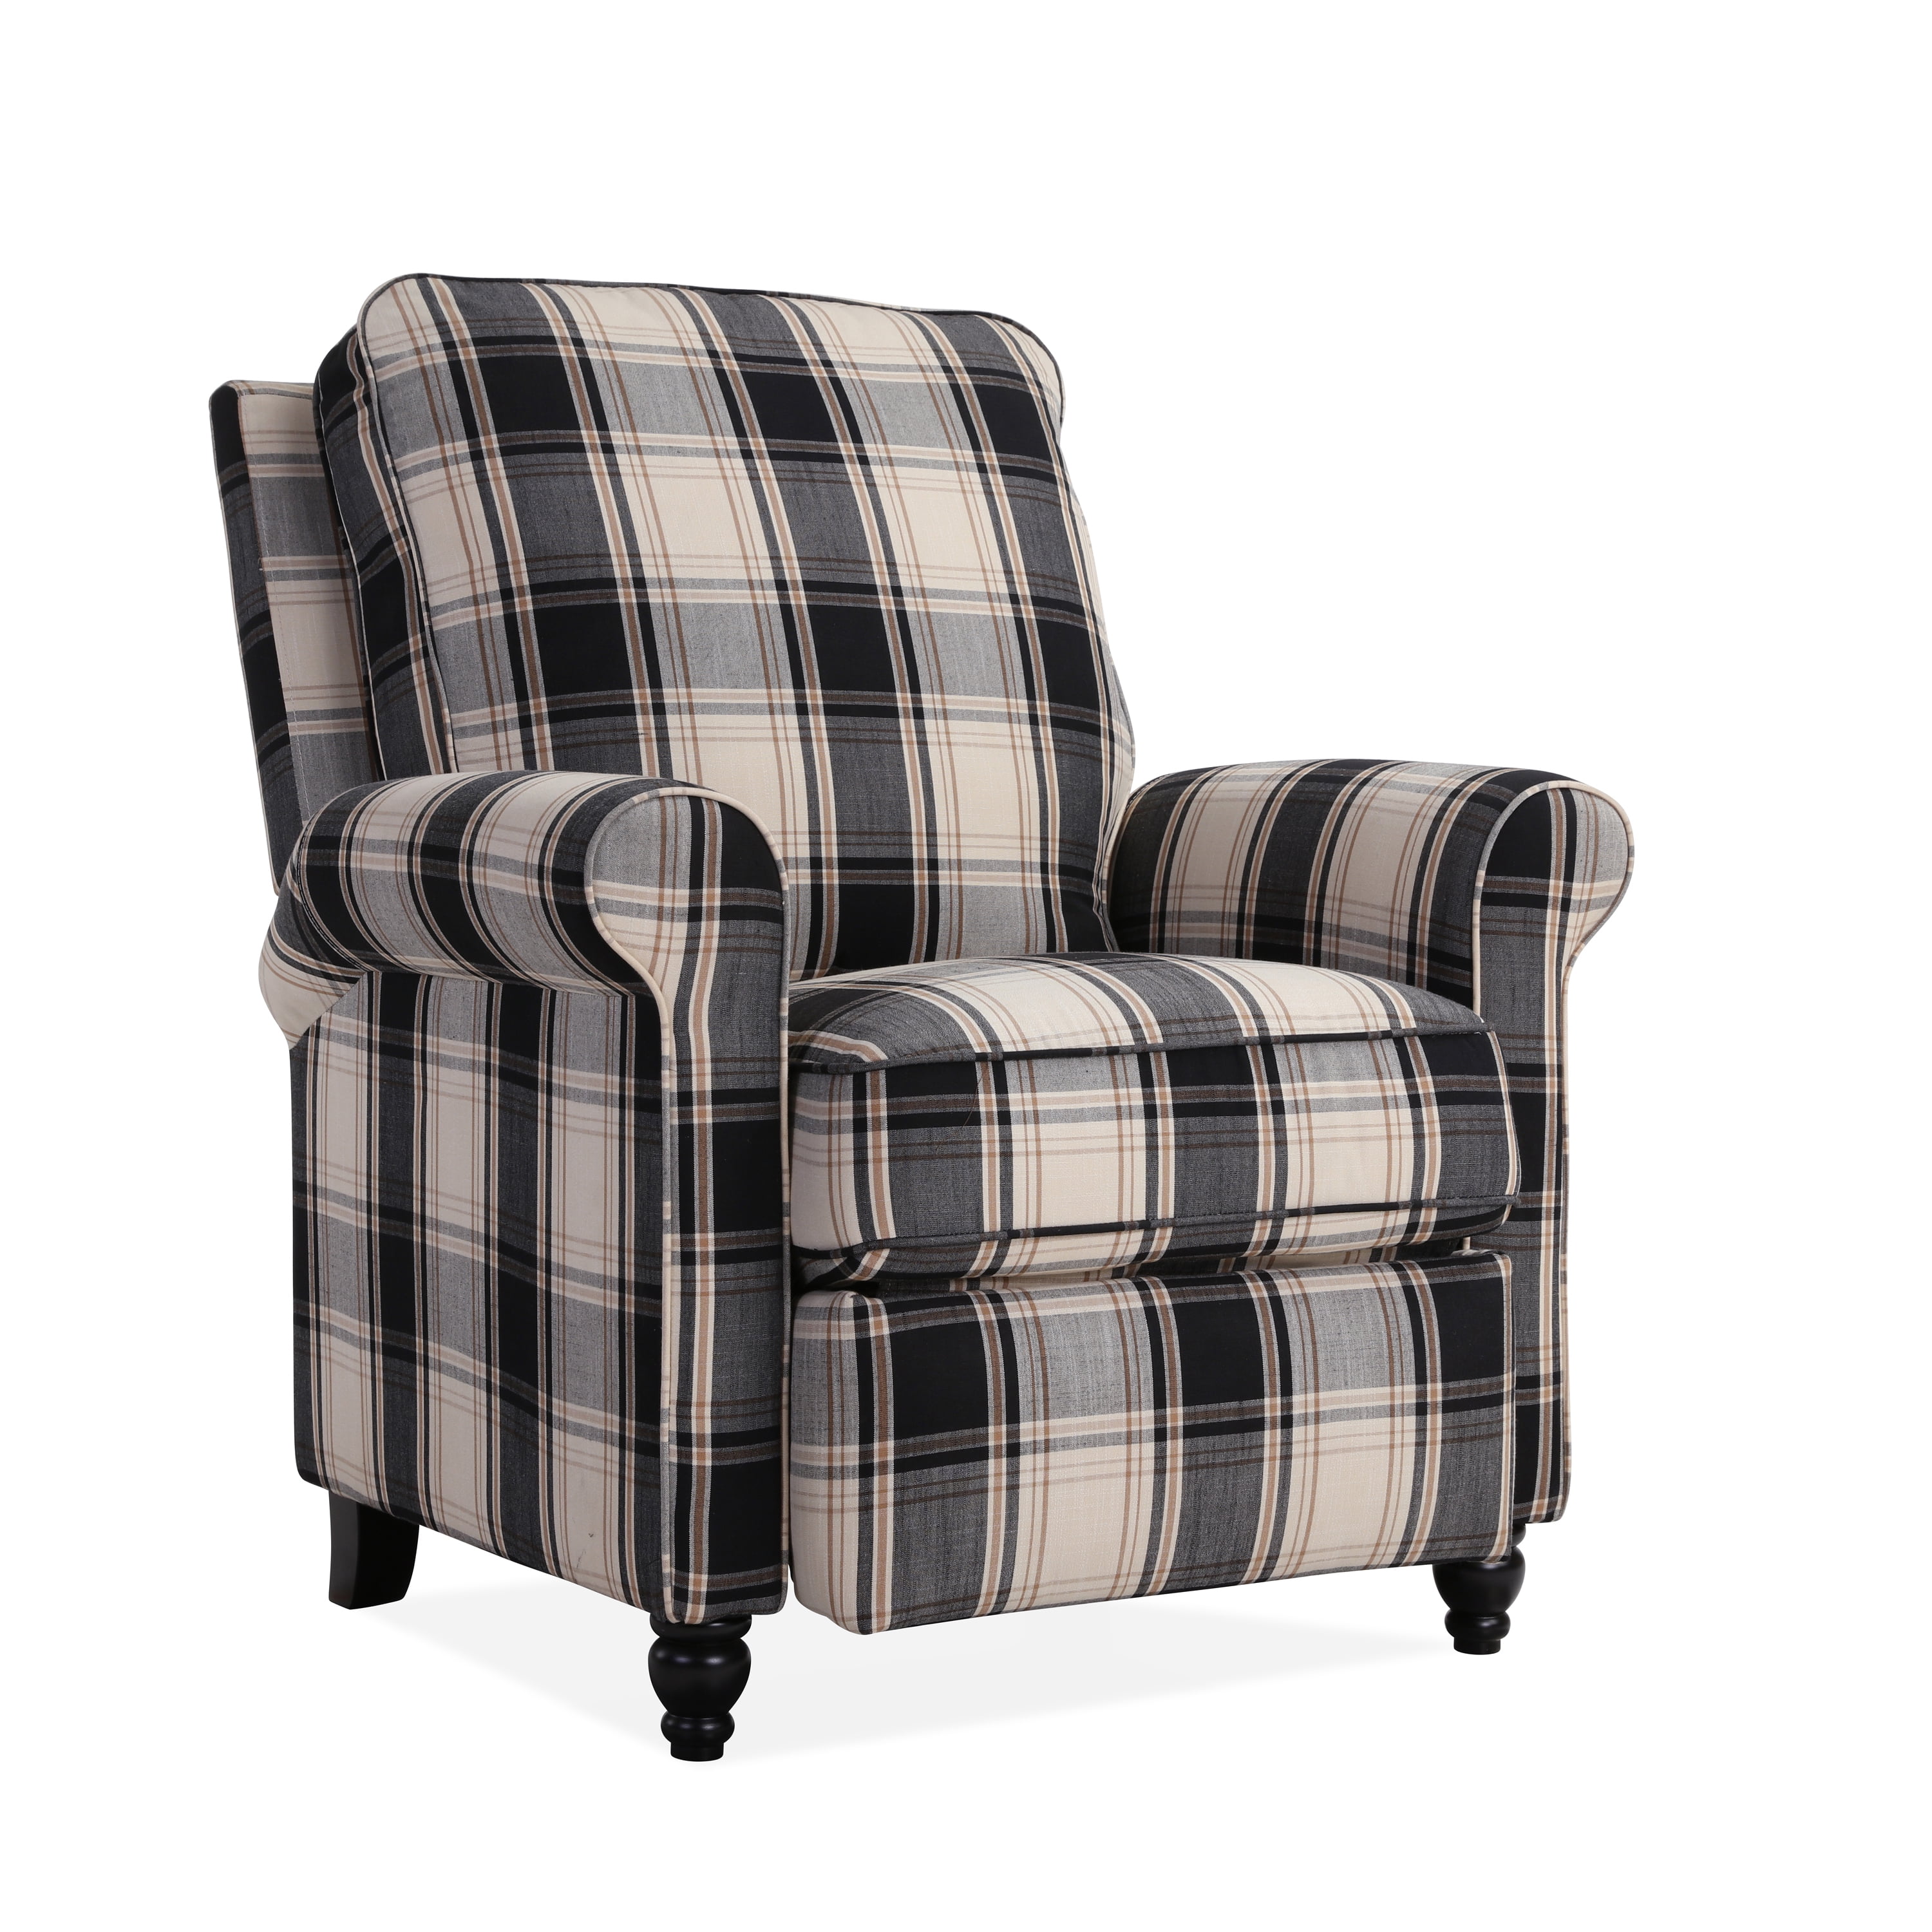 Homesvale Lincoln Push Back Recliner Chair in Brown and Black Plaid